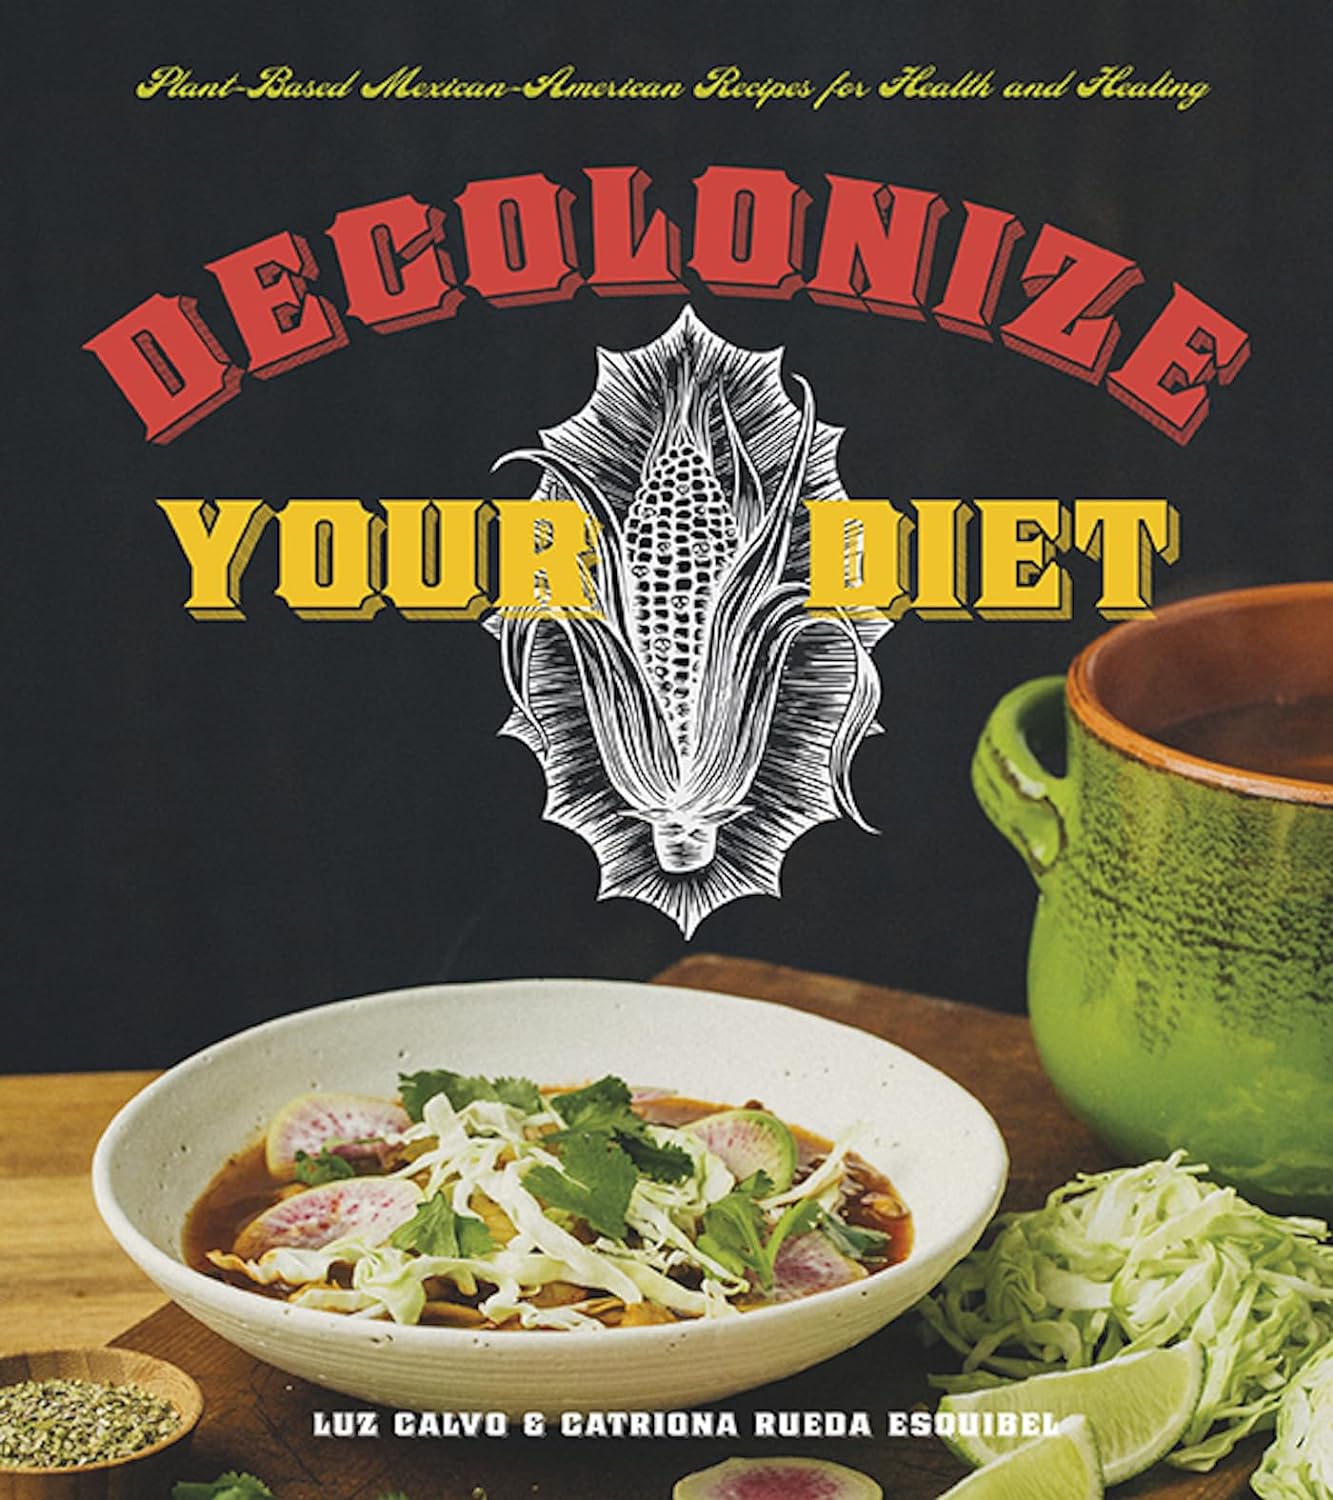 Decolonize Your Diet: Plant-Based Mexican-American Recipes for Health and Healing (Luz Calvo, Catriona Rueda Esquibel)